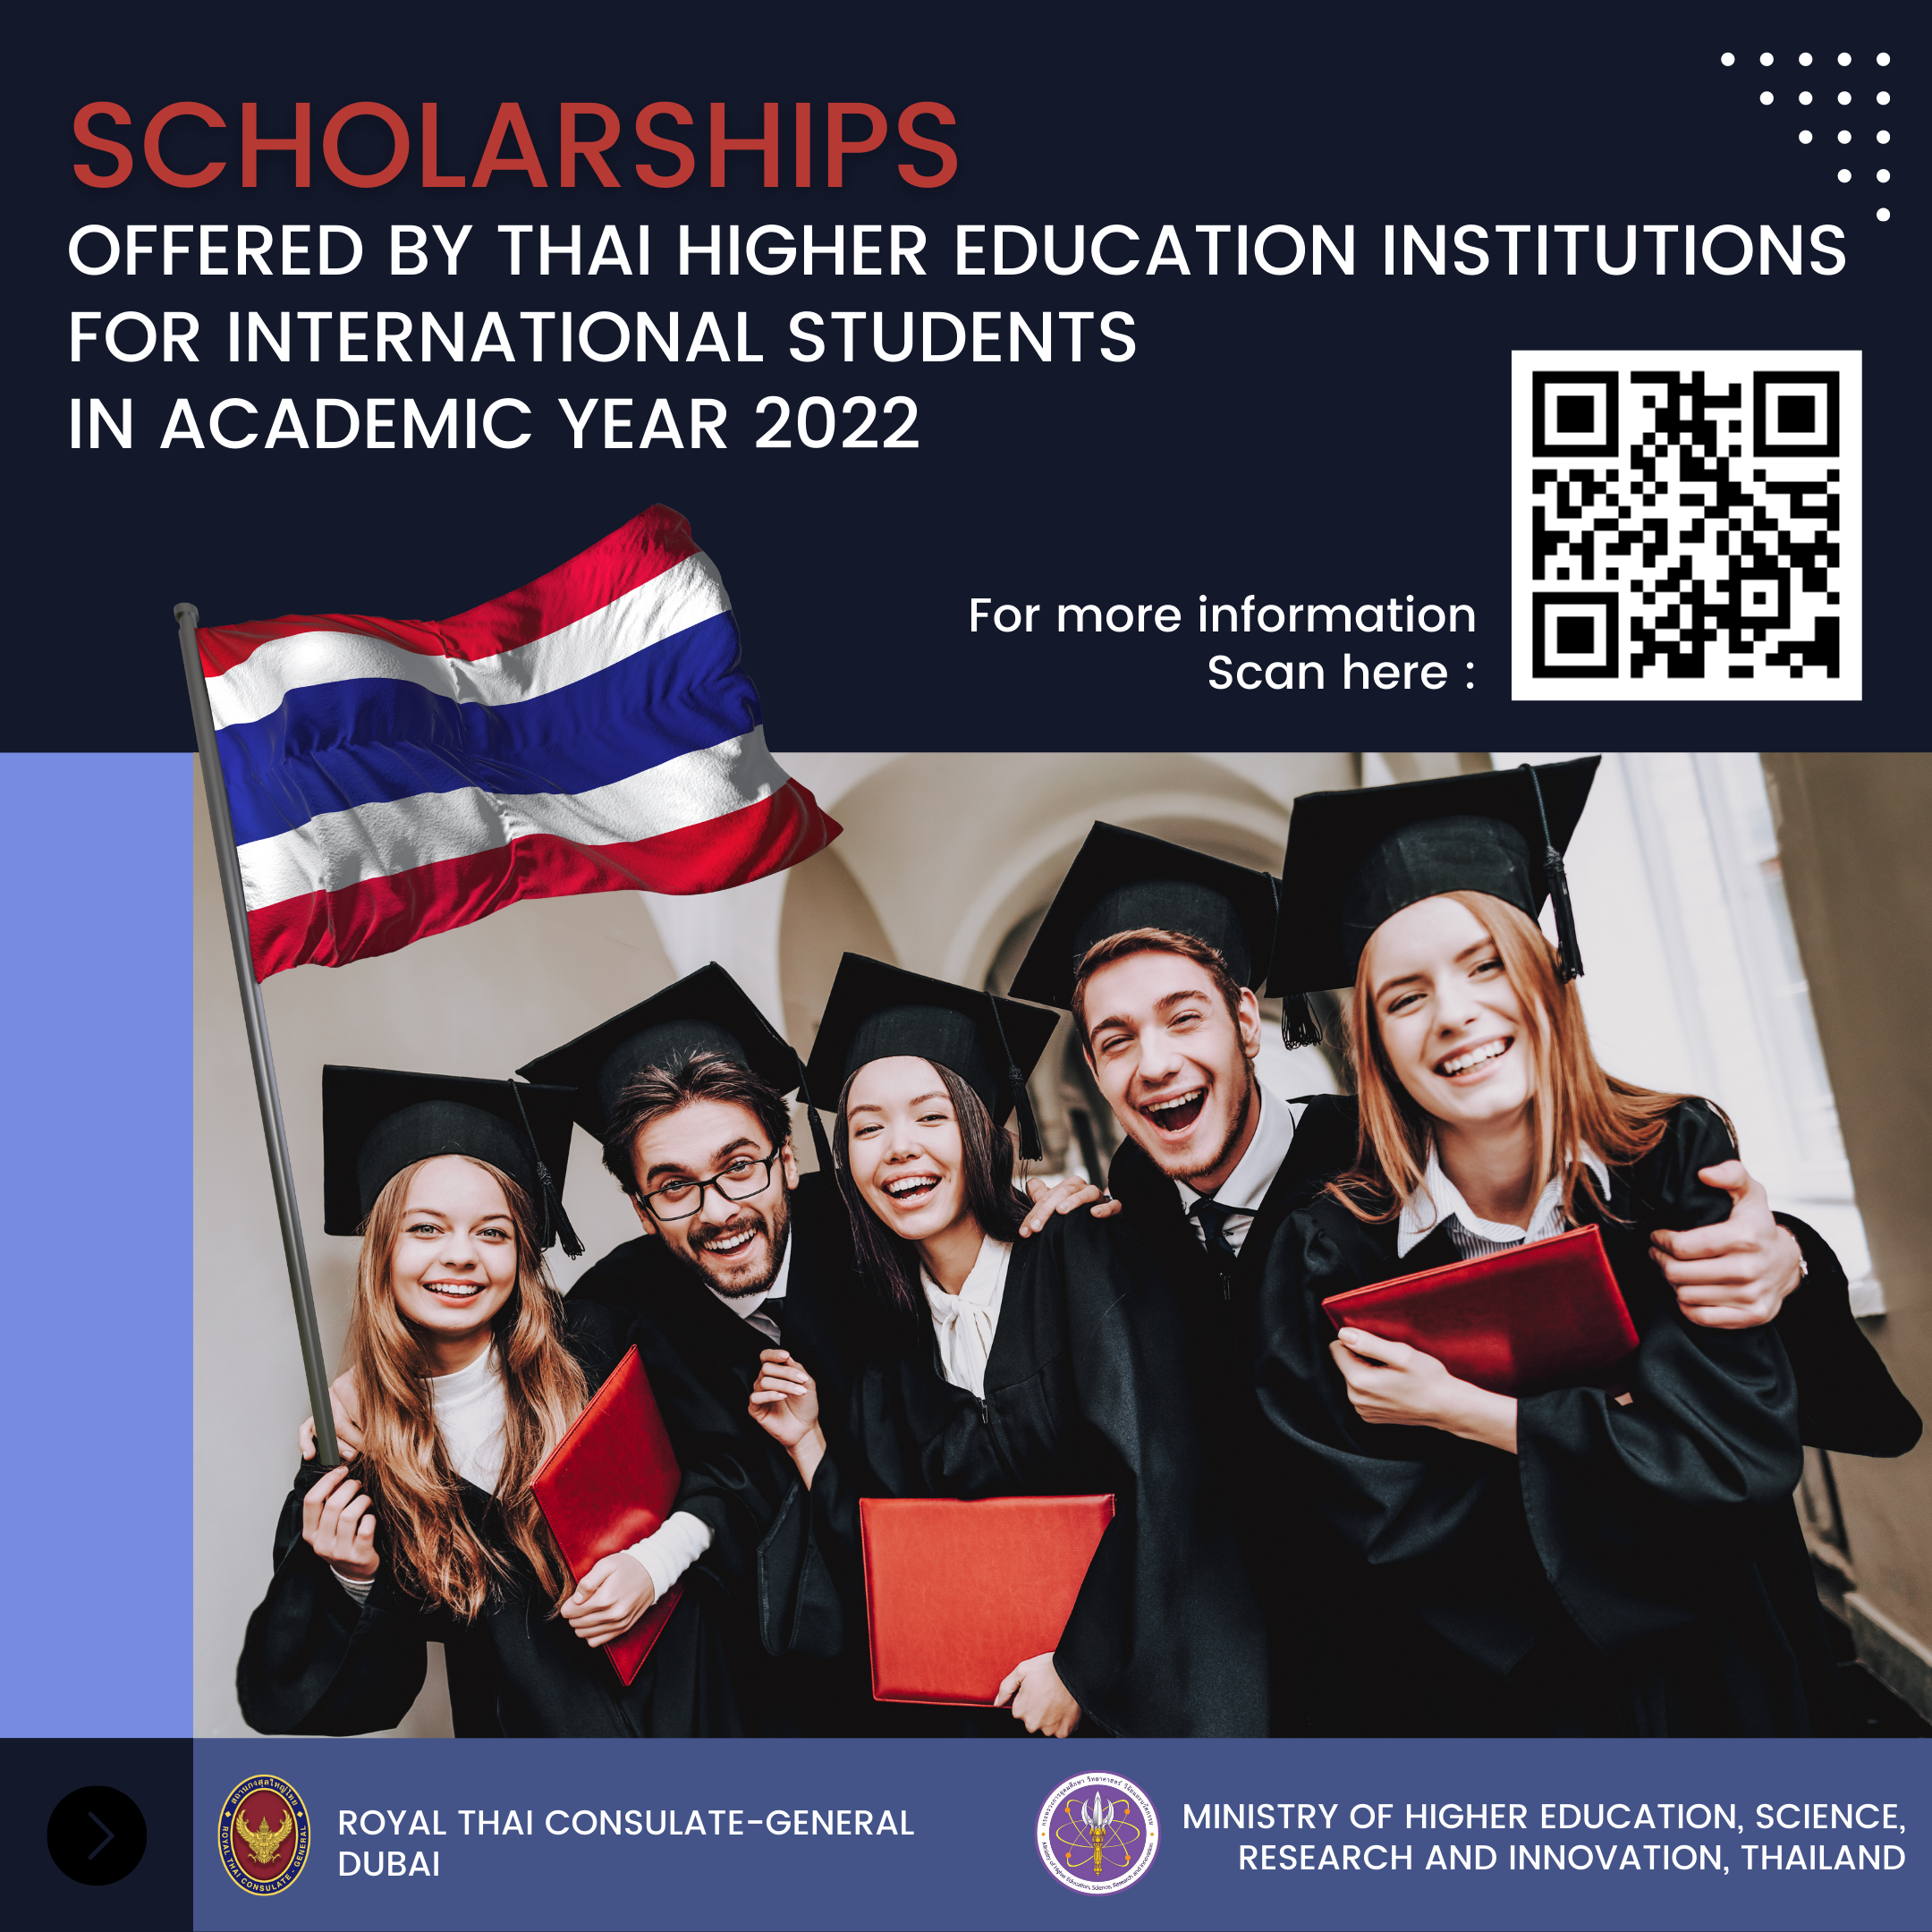 SCHOLARSHIPS_OFFERED_BY_THAI_HIGHER_EDUCATION_INSTITUTIONS_FOR_INTERNATIONAL_STUDENTS_IN_ACADEMIC_YEAR_2022